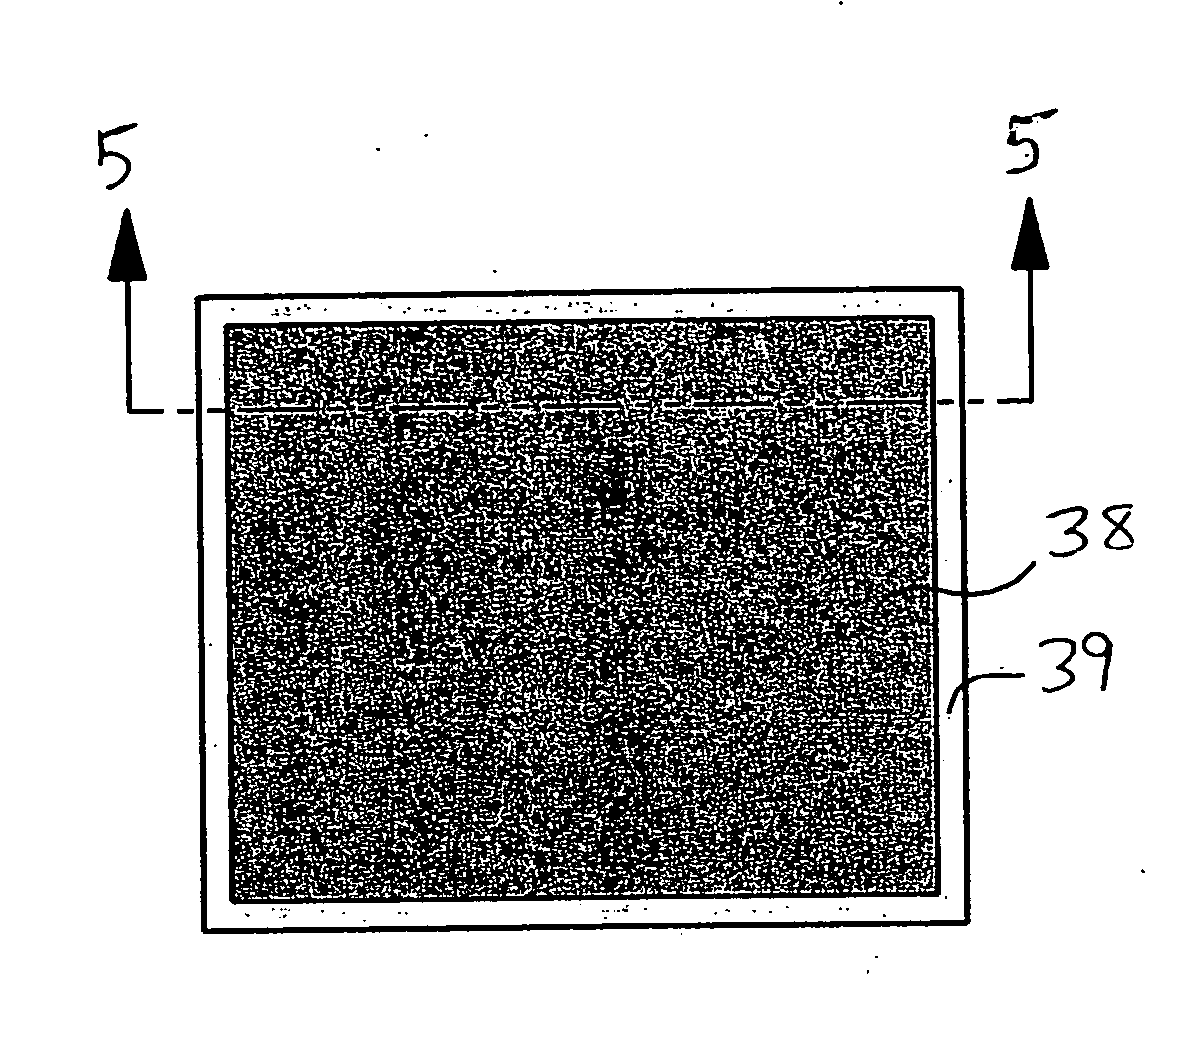 Method and apparatus for dissipating heat